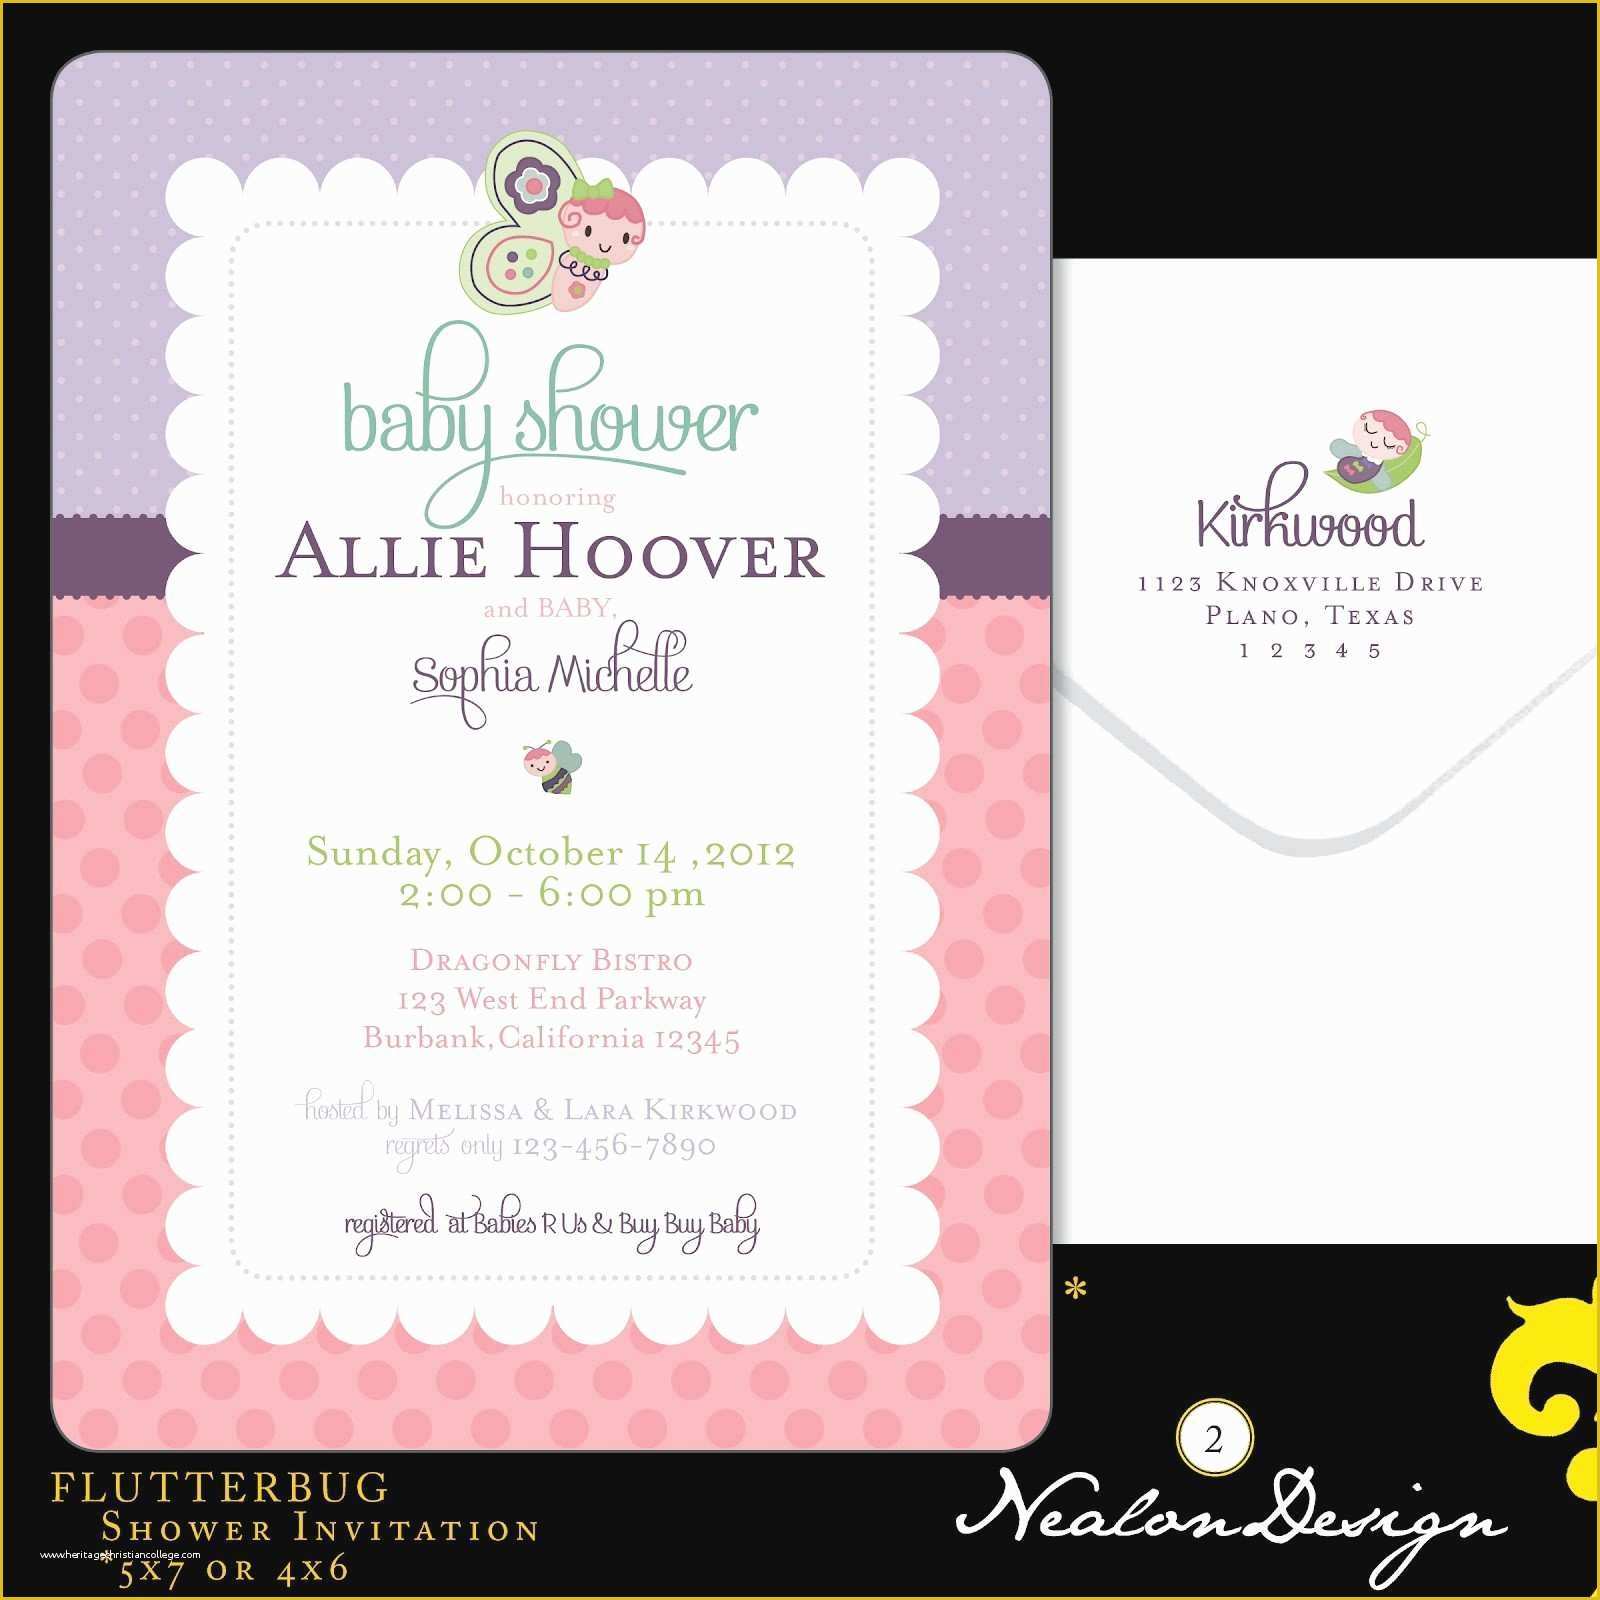 Free Bridal Shower Invitation Templates for Word Of Beautiful Bridal Shower Invitation Templates for Microsoft